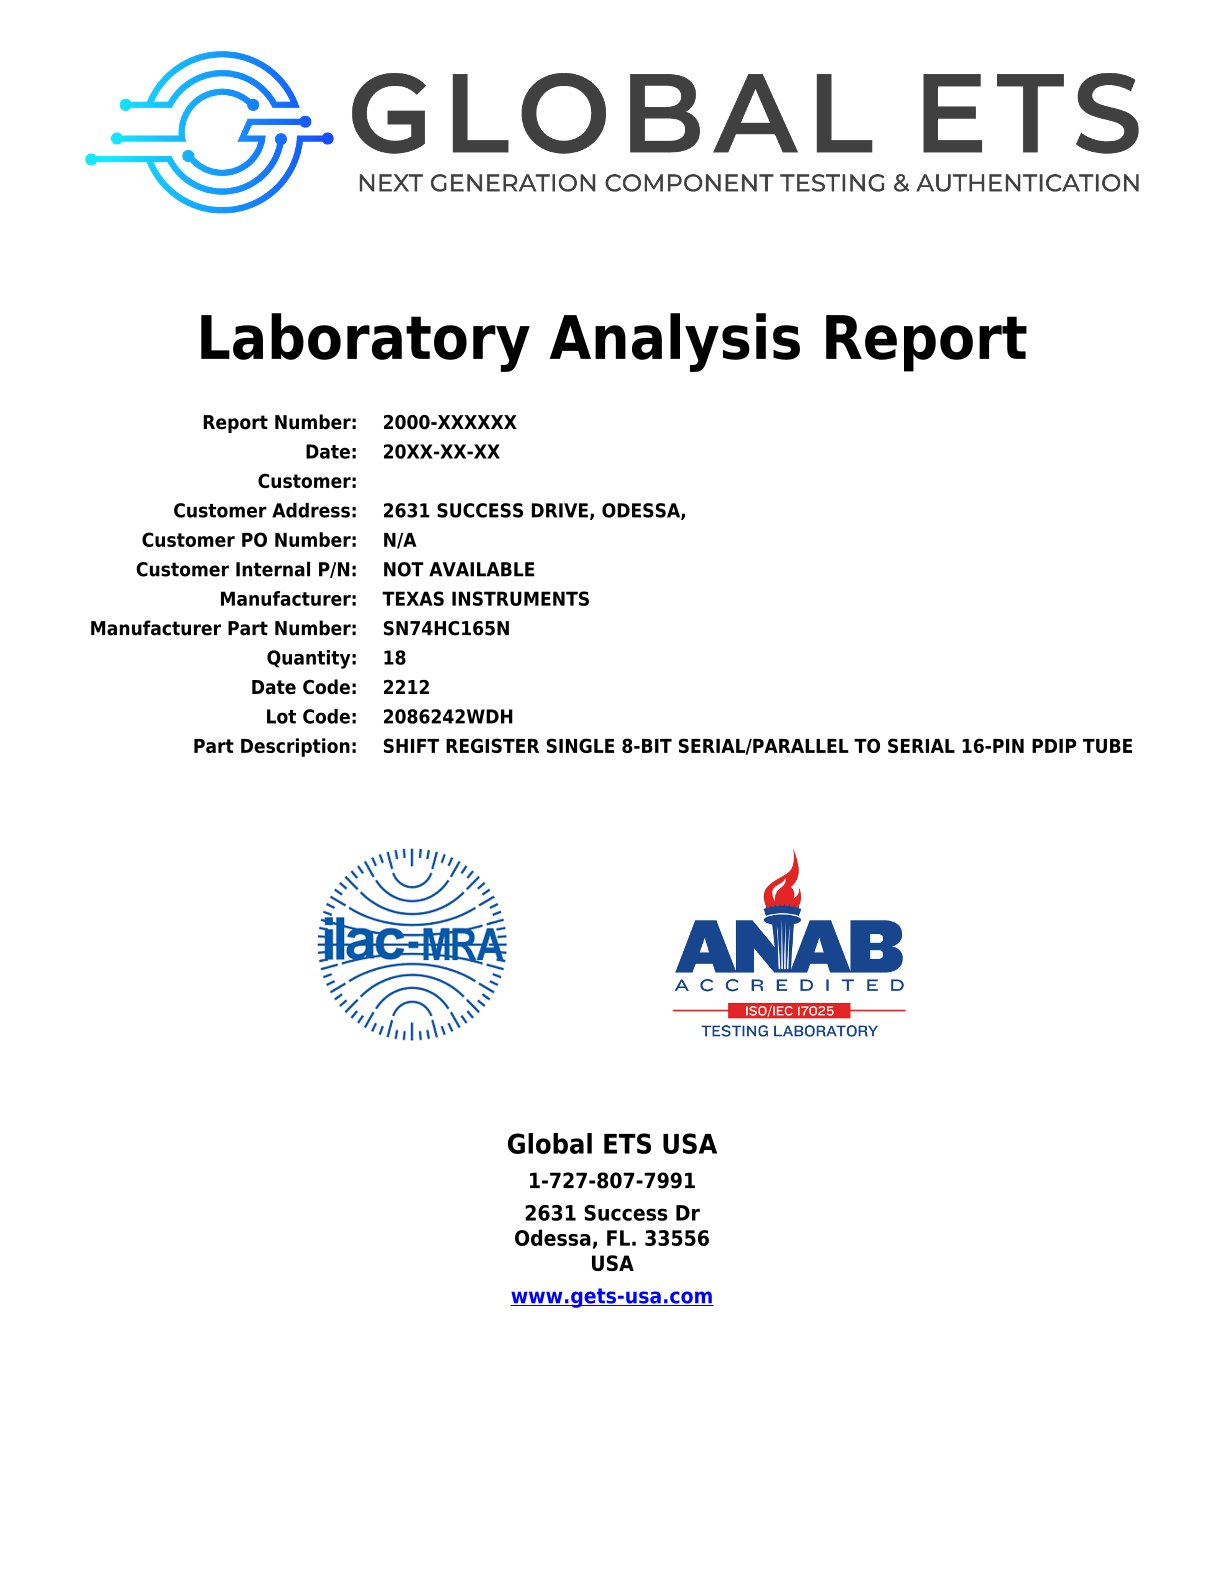 Document titled 'Laboratory Analysis Report' by Global ETS, a component testing and authentication company. Includes report number, date, customer information, manufacturer details, and part description. Logos of ilac-MRA and ANAB are also present. Contact information for Global ETS USA is listed at the bottom.